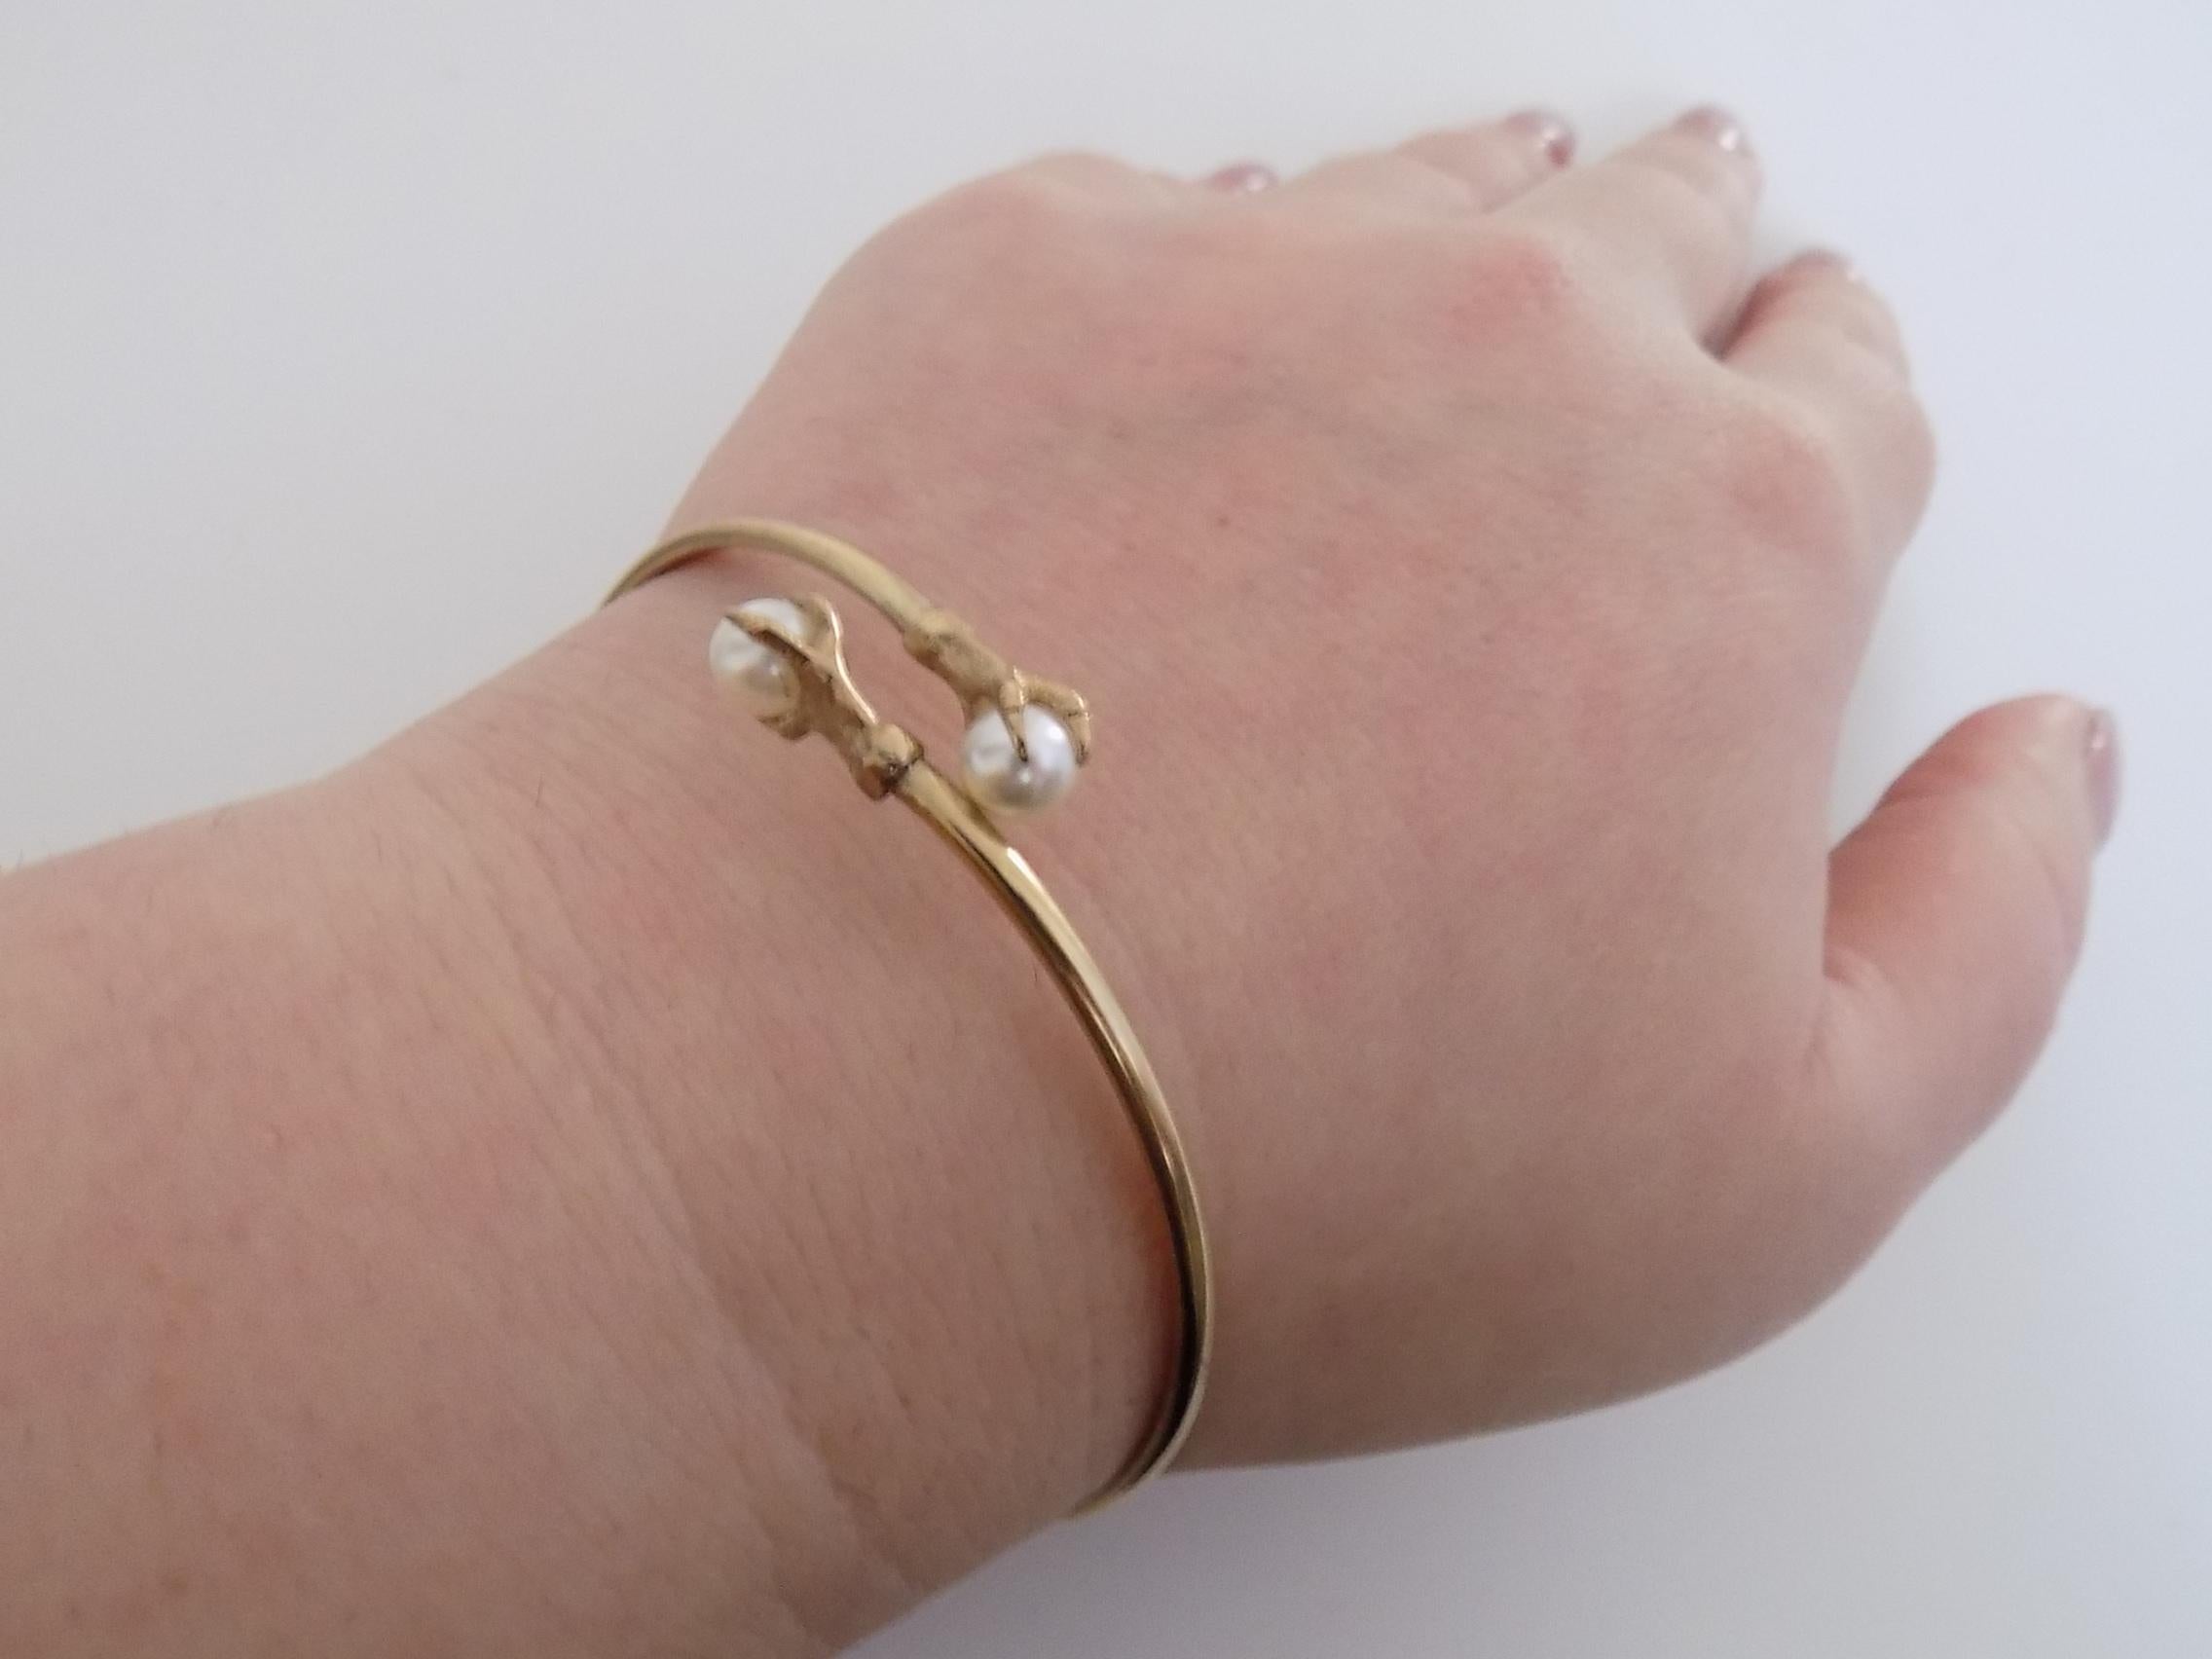 Vintage 9CT Gold and Pearl Claw Bypass Bracelet Bangle 2